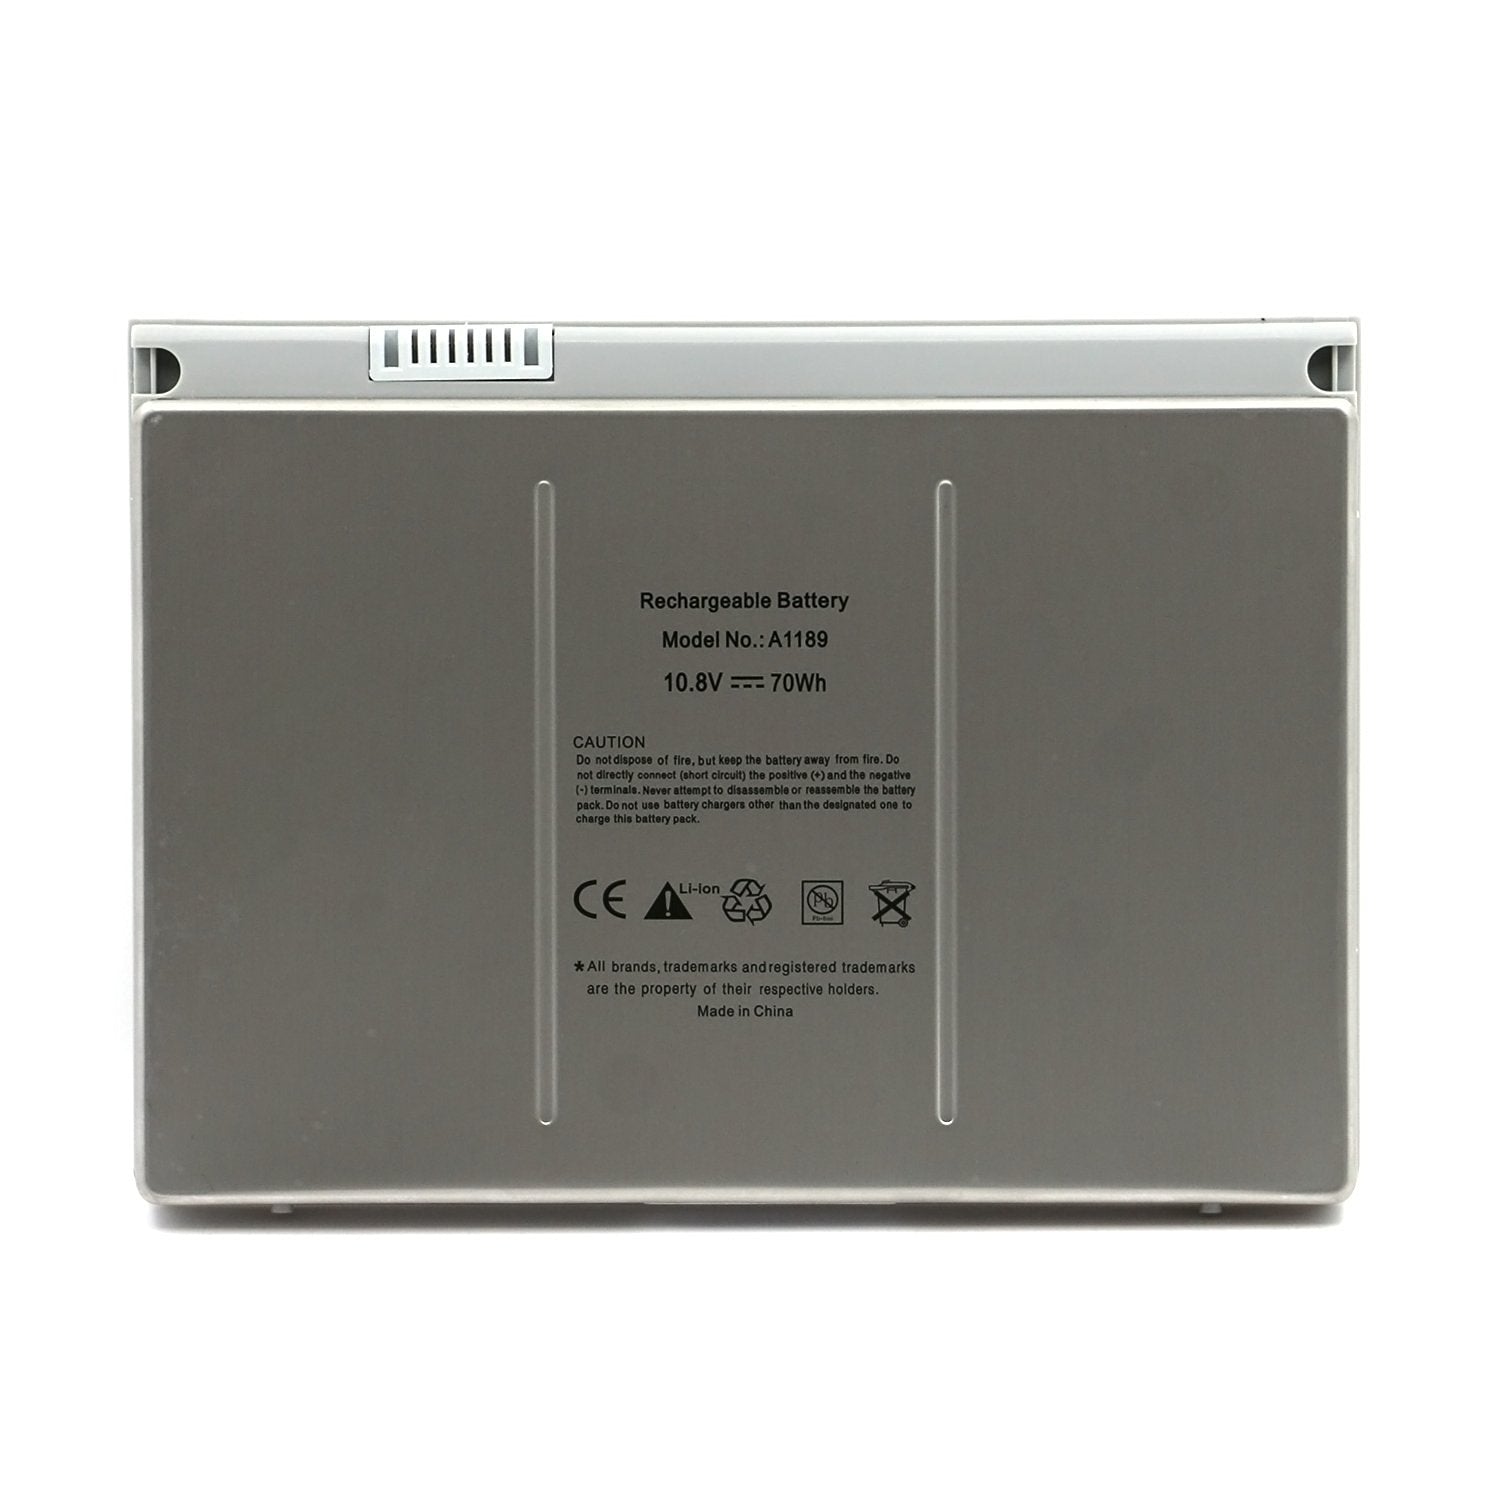 A1189 Apple MacBook Pro 17 Series Replacement Laptop Battery - eBuy UAE